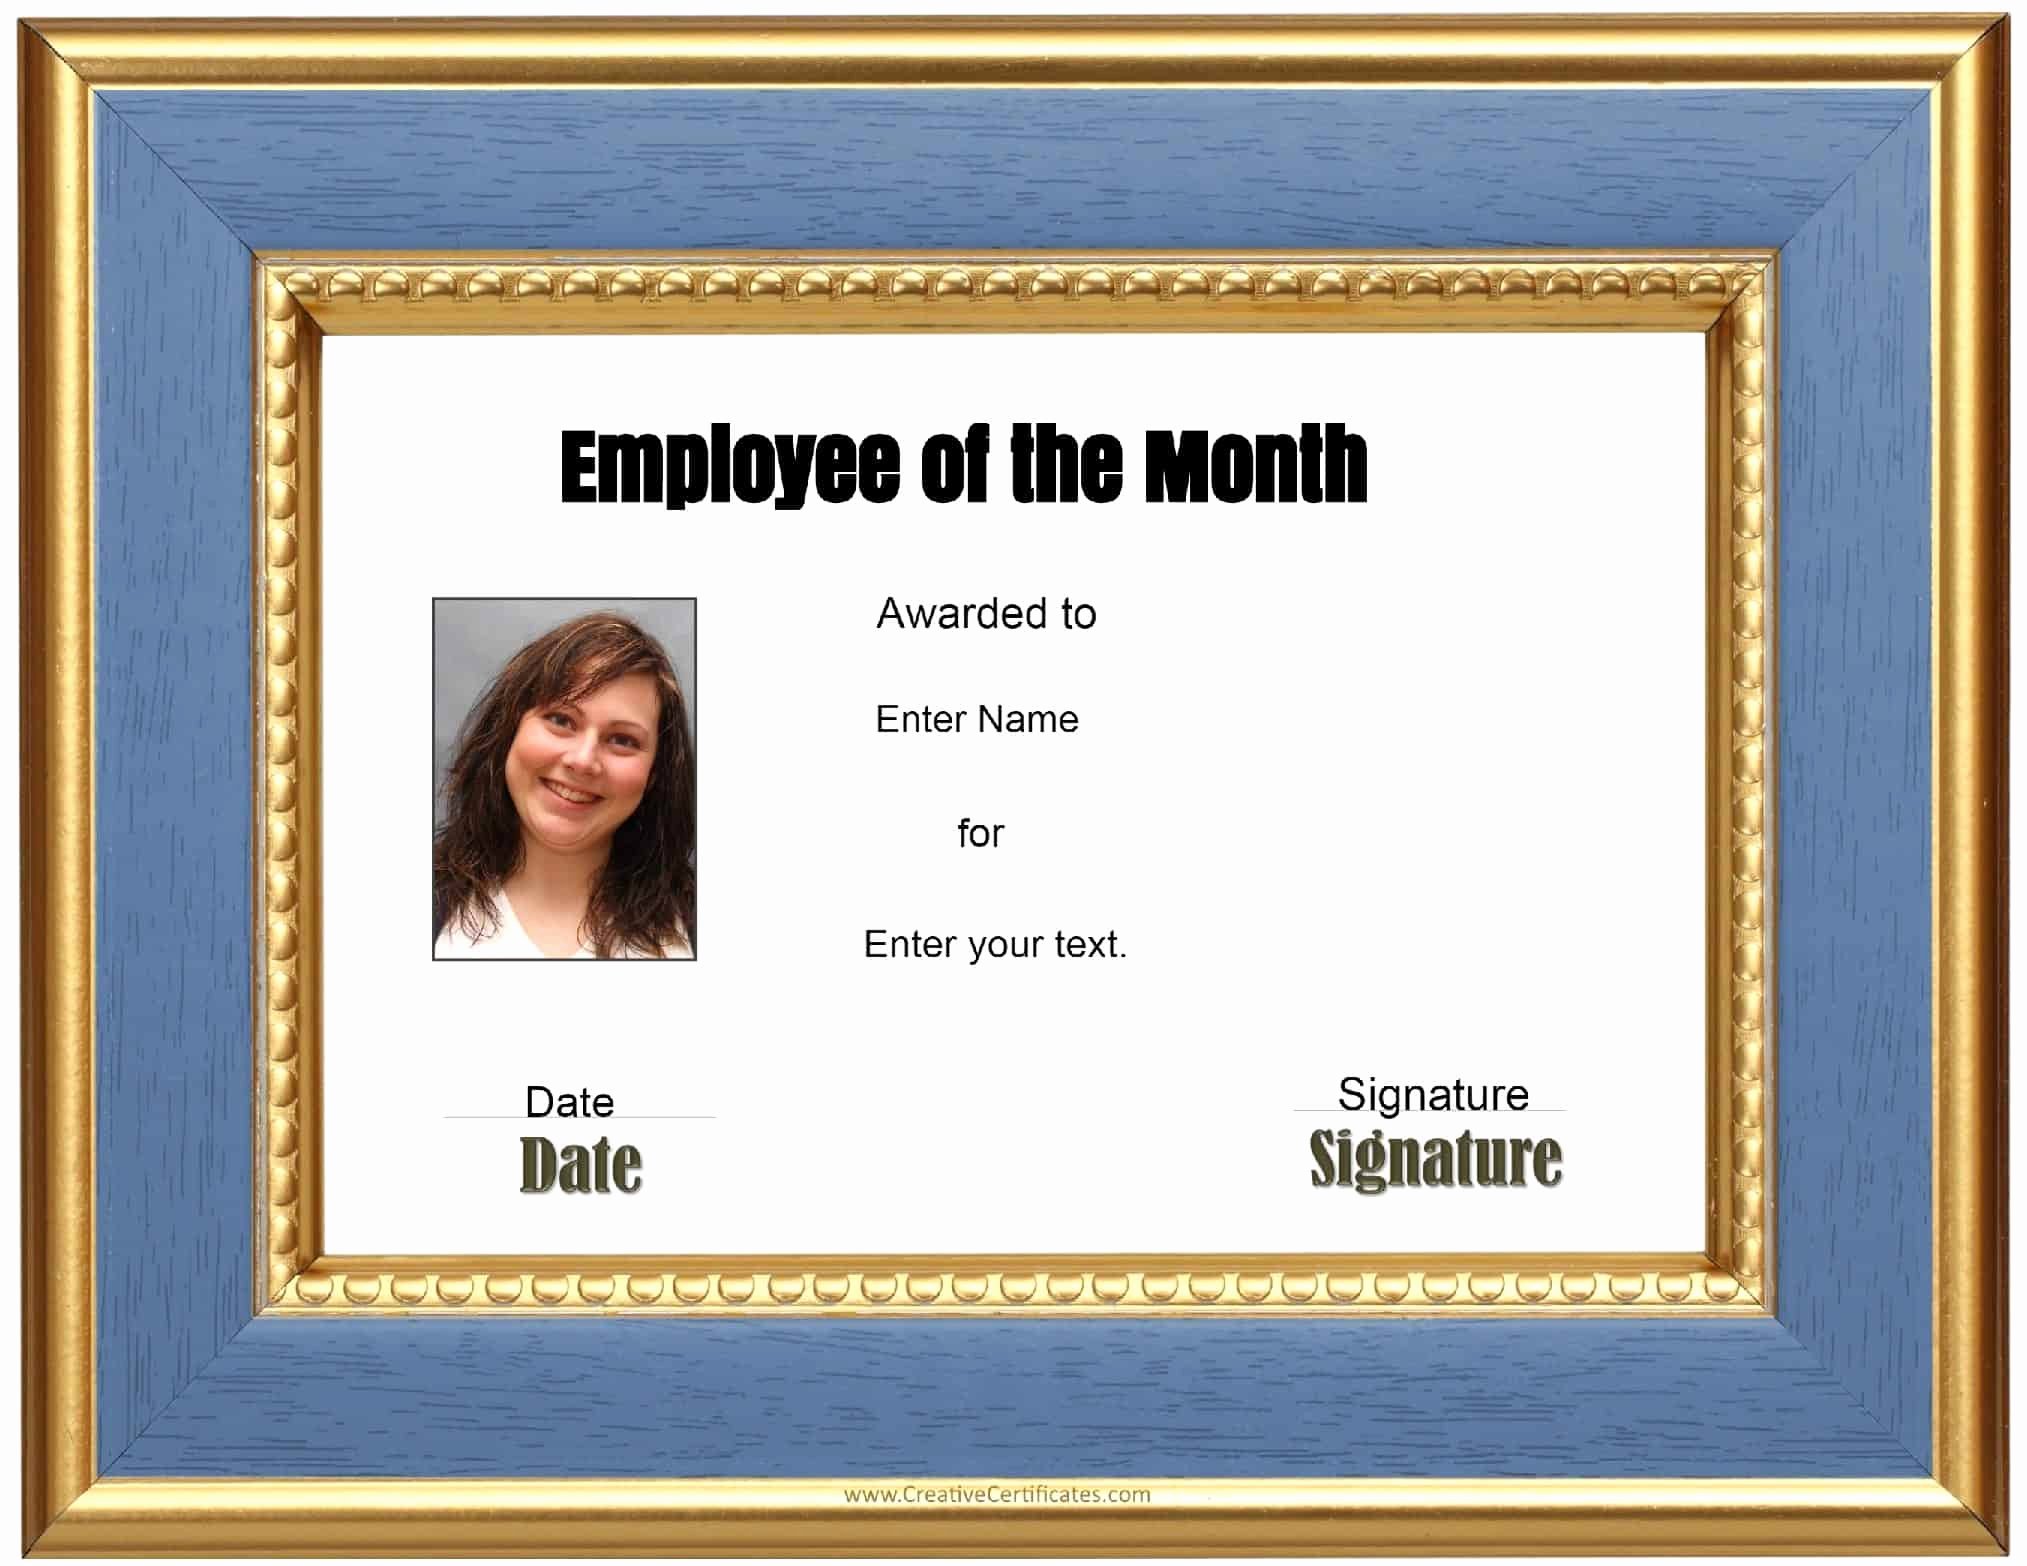 Employee Of the Month Certificate Template with Photo Beautiful Free Custom Employee Of the Month Certificate